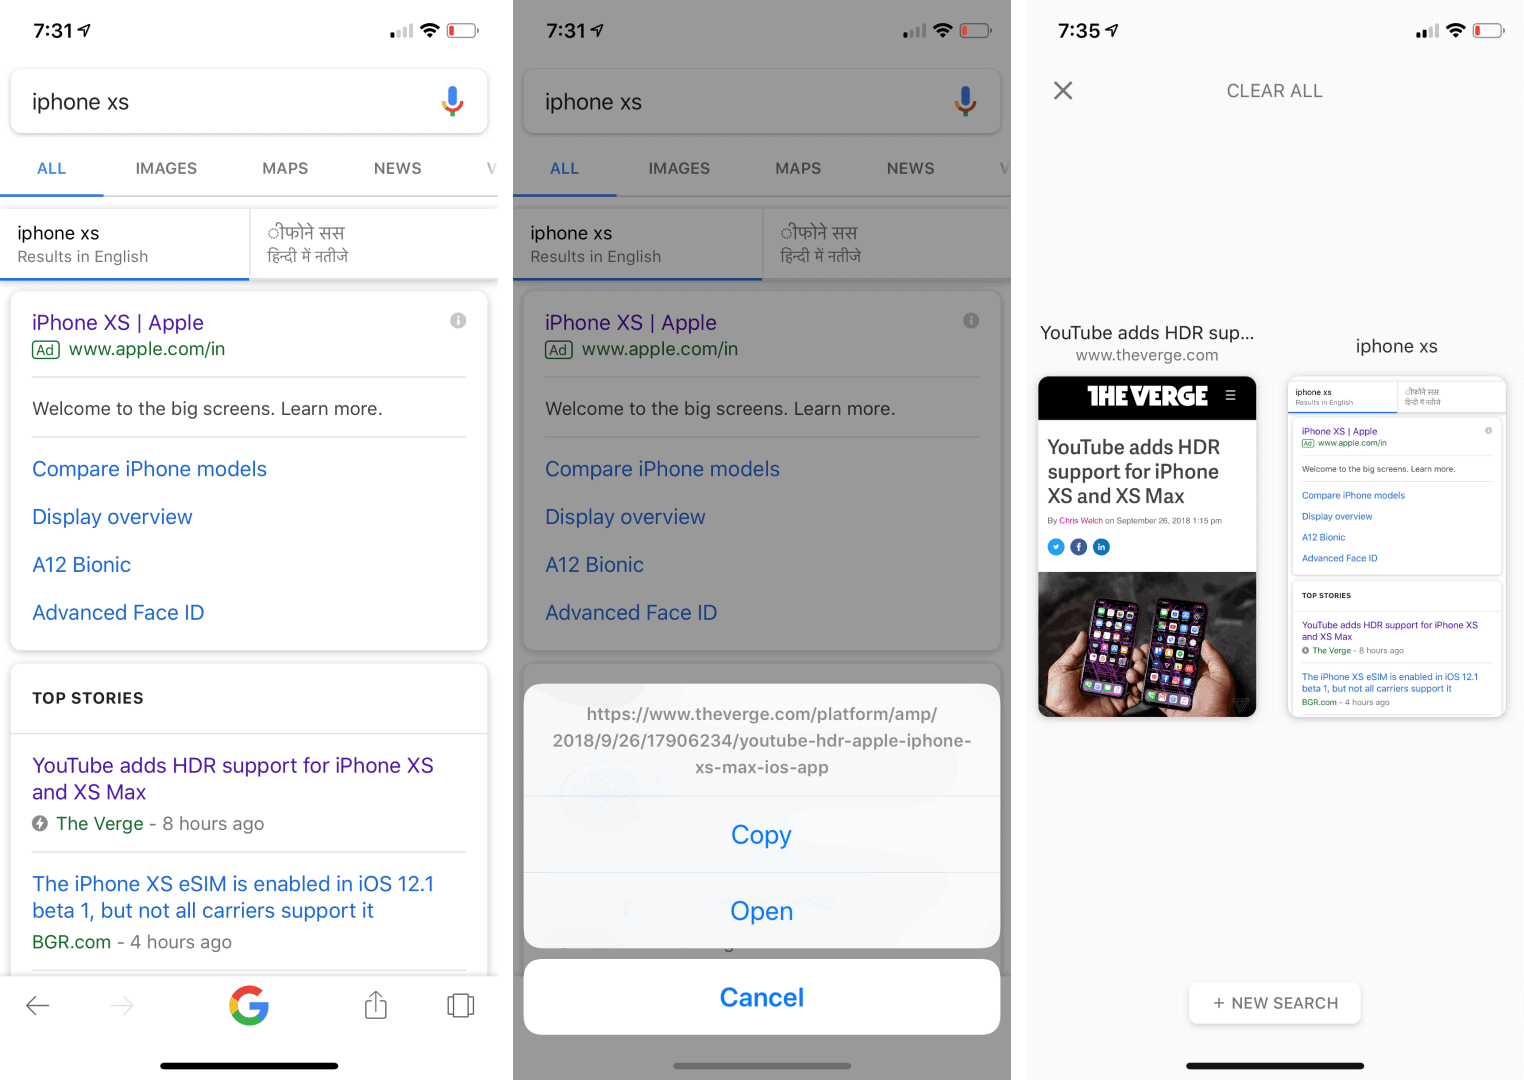 Google iOS app now lets you open multiple pages at once from search results